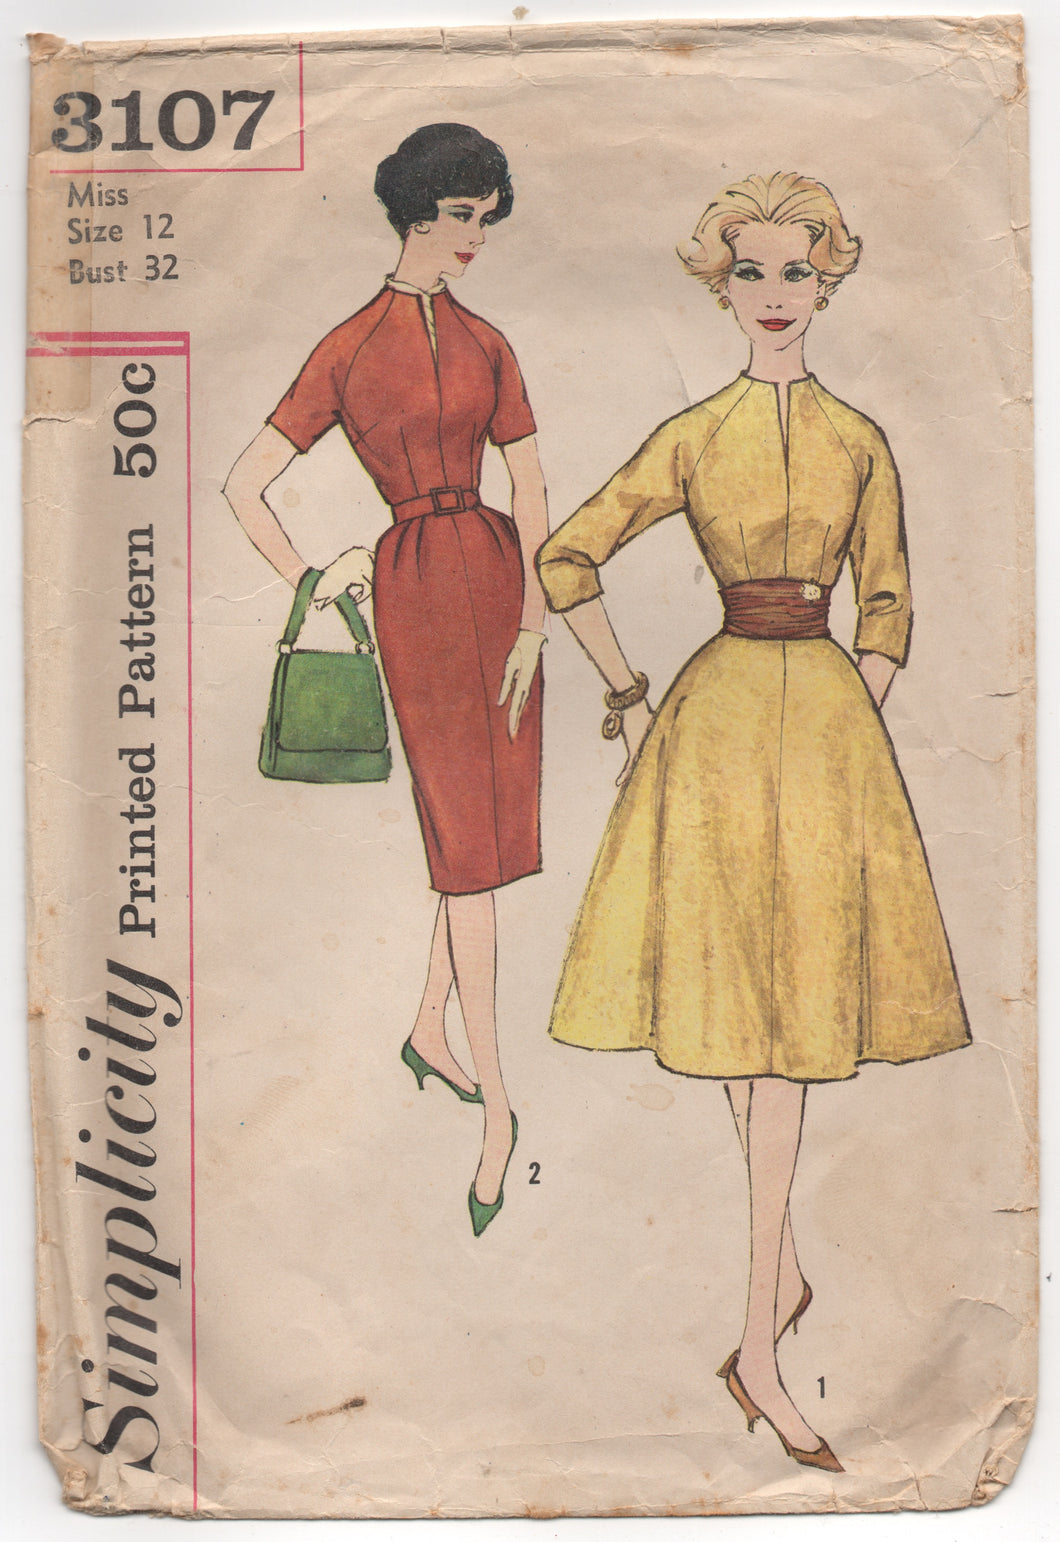 1950's Simplicity One Piece Fit and Flare or Wiggle Dress with Slit Neckline - Bust 32